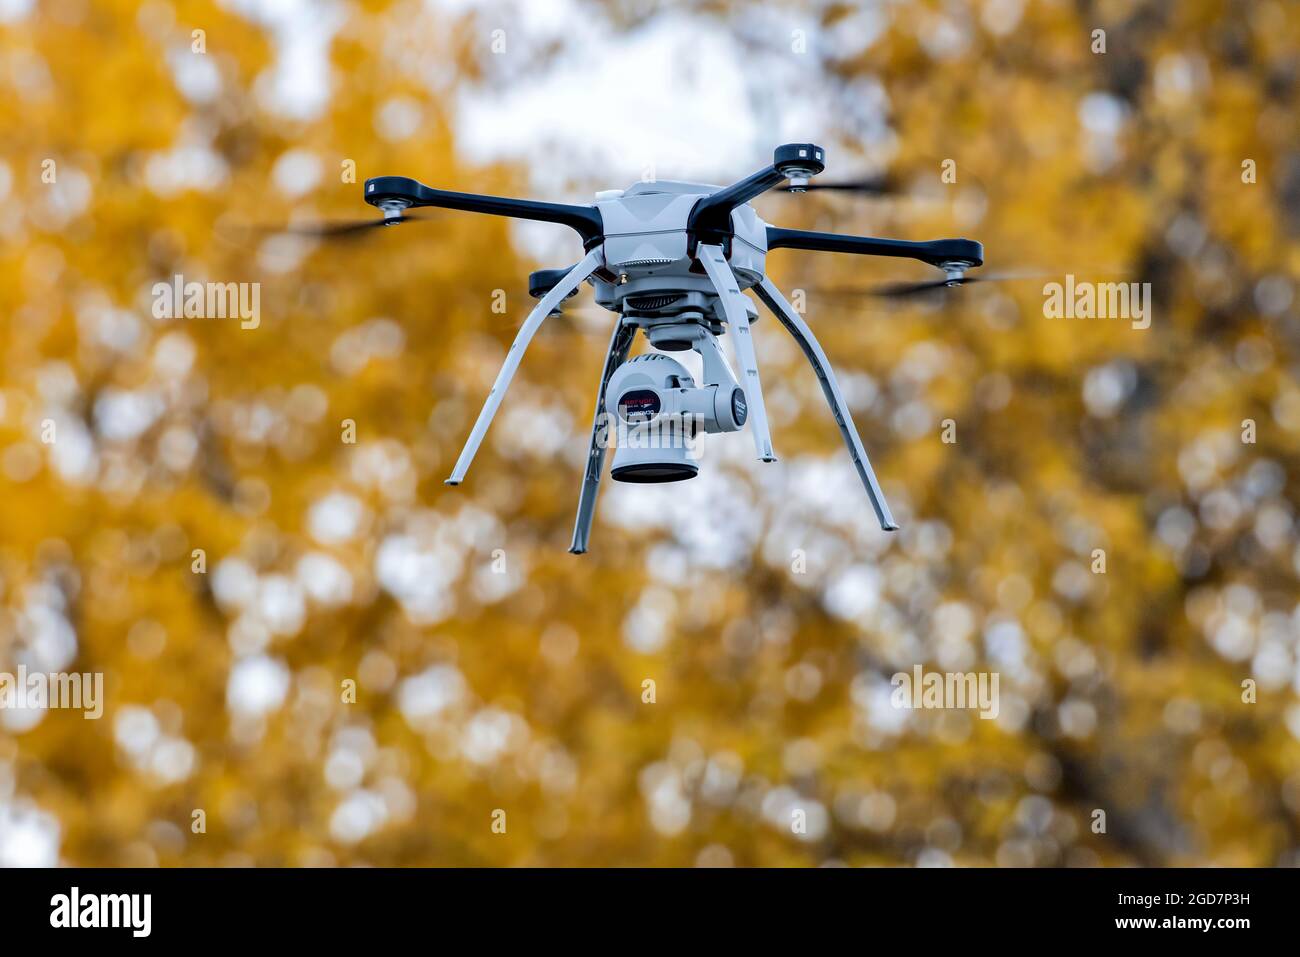 A drone operated by Airmen with the 773d Civil Engineer Squadron flies over a training area while capturing aerial intelligence is support of a readiness and training exercise, Polar Force 20-1, at Joint Base Elmendorf-Richardson, Alaska, Oct. 8, 2019. Designed to test JBER’s mission readiness, Polar Force 20-1 is a two-week exercise that hones Airmen’s skills and experience when facing adverse situations. Airmen refined their contingency tactics, techniques and procedures in support of the Pacific Air Force’s Agile Combat Employment concept of operations. Agile Combat Support excellence yield Stock Photo